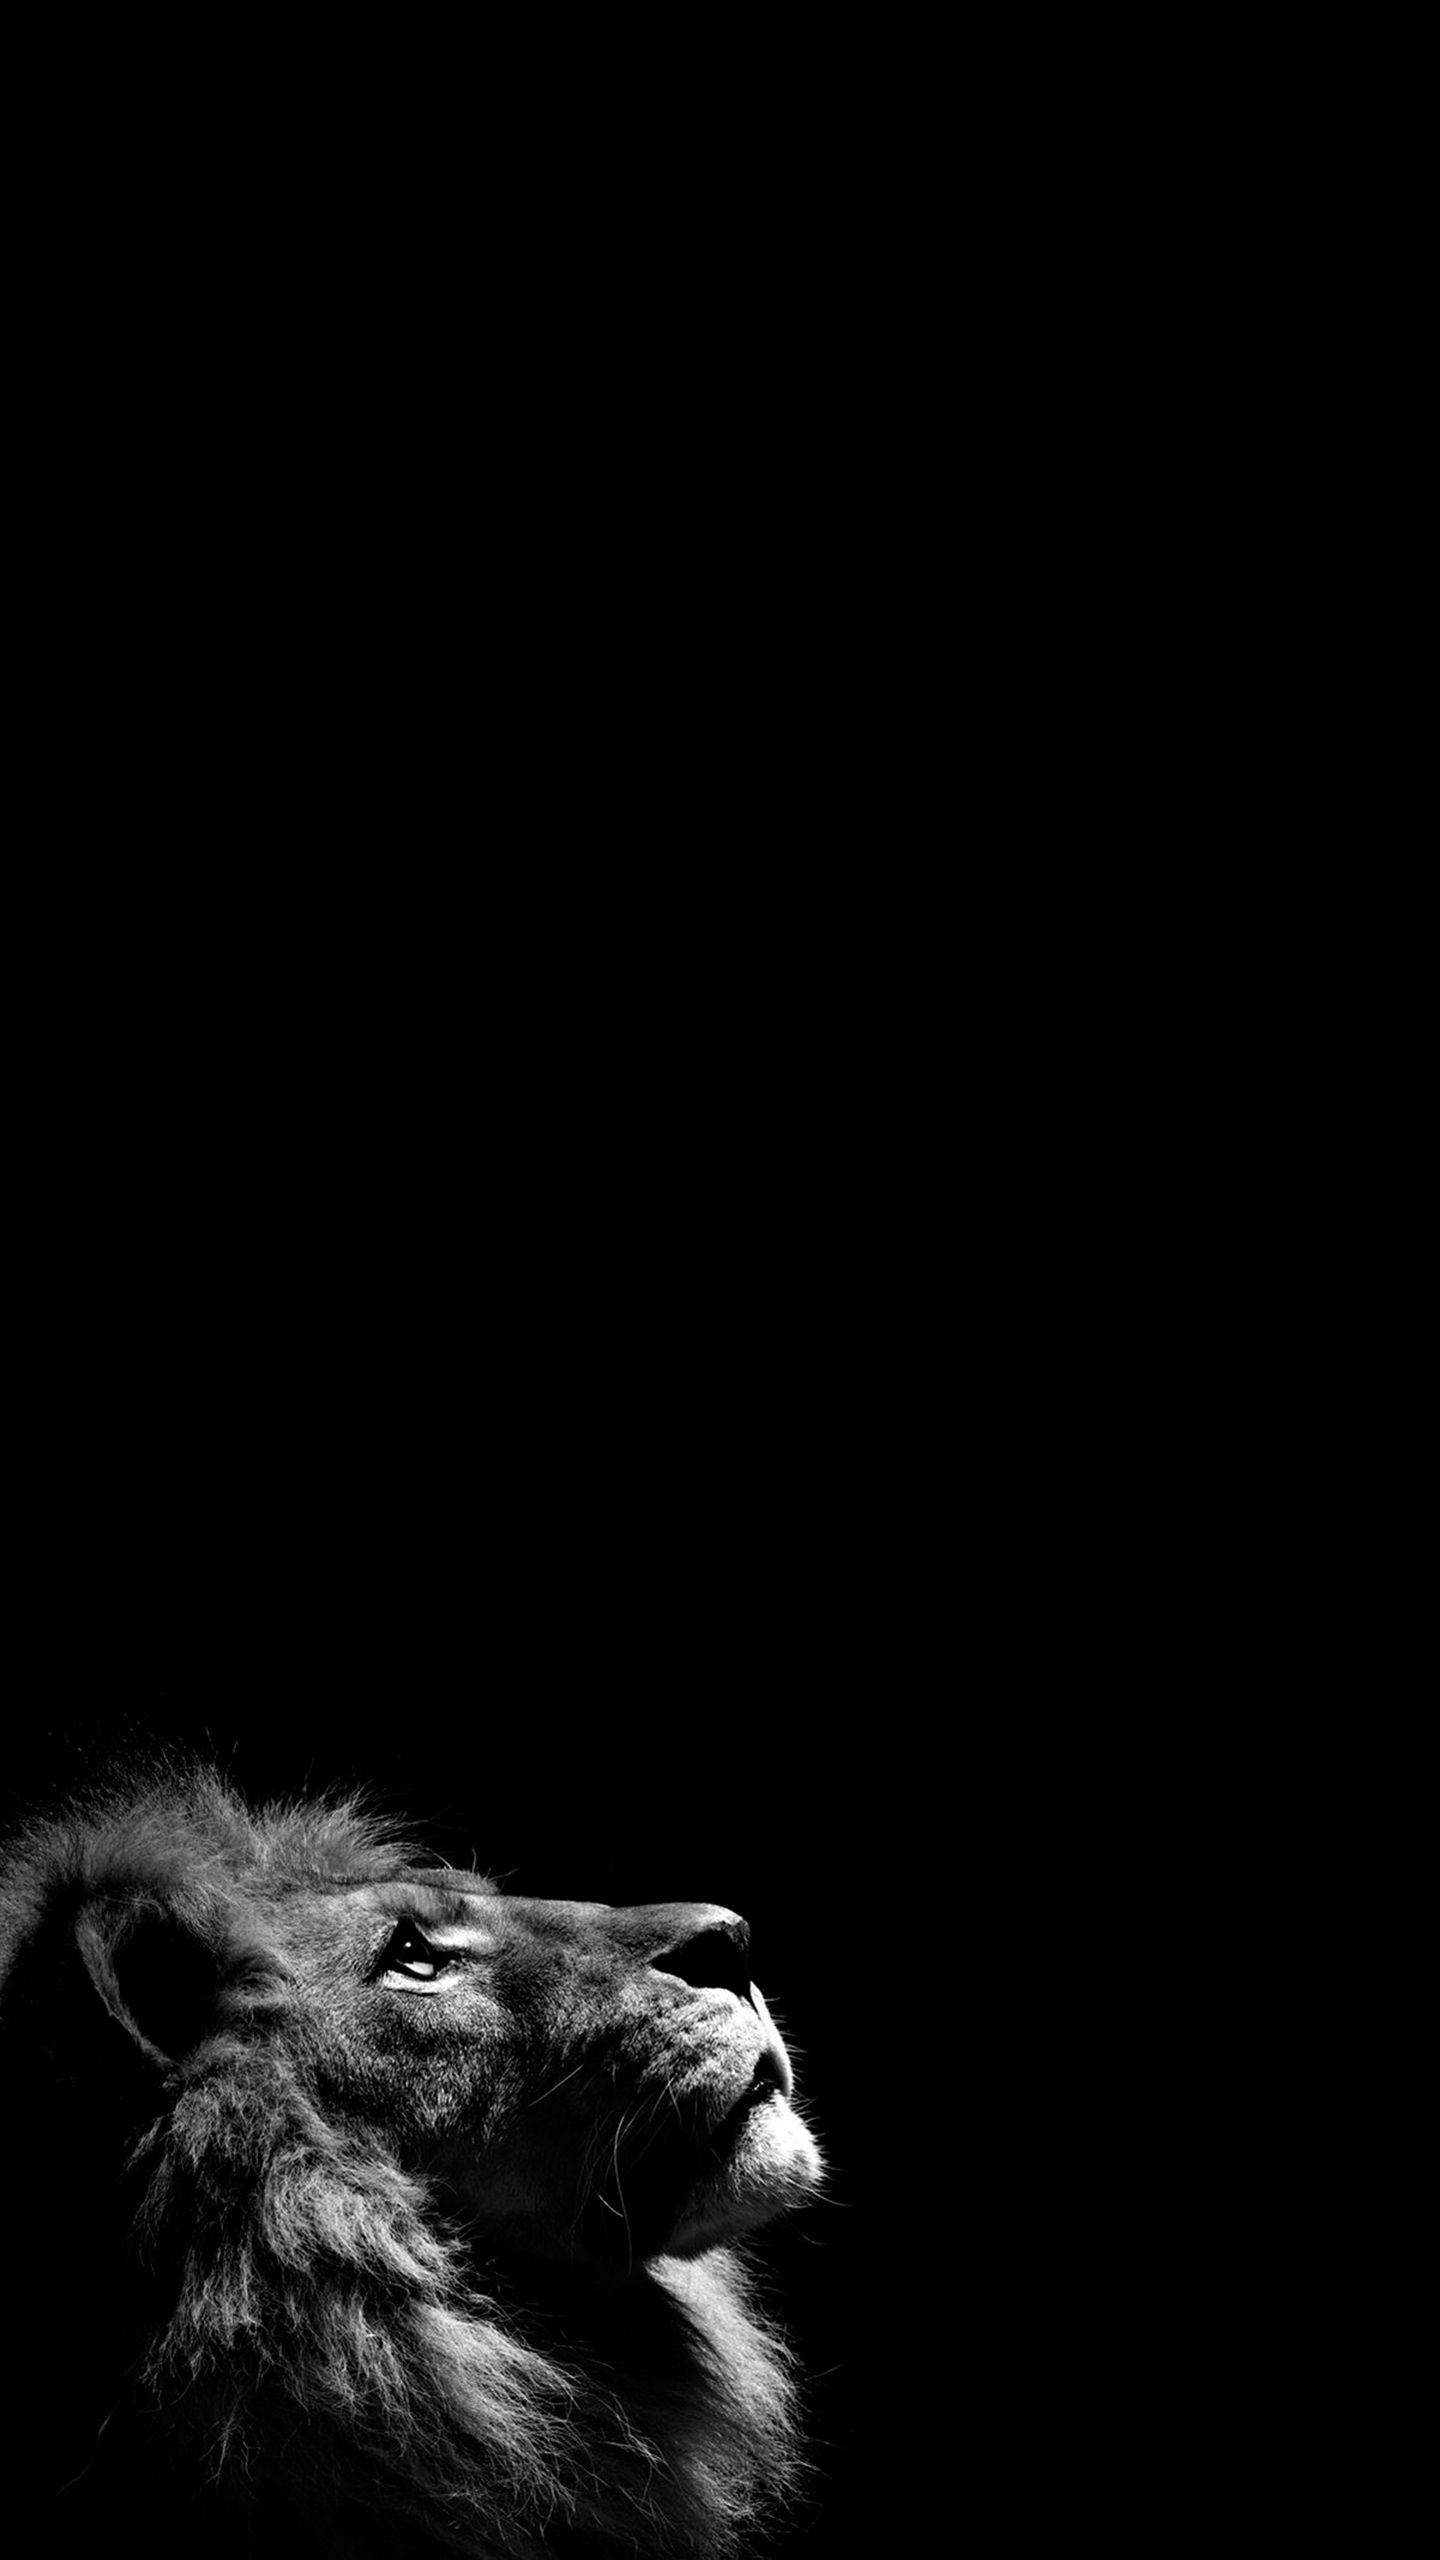 amoled screen wallpaper,black,white,black and white,monochrome photography,darkness